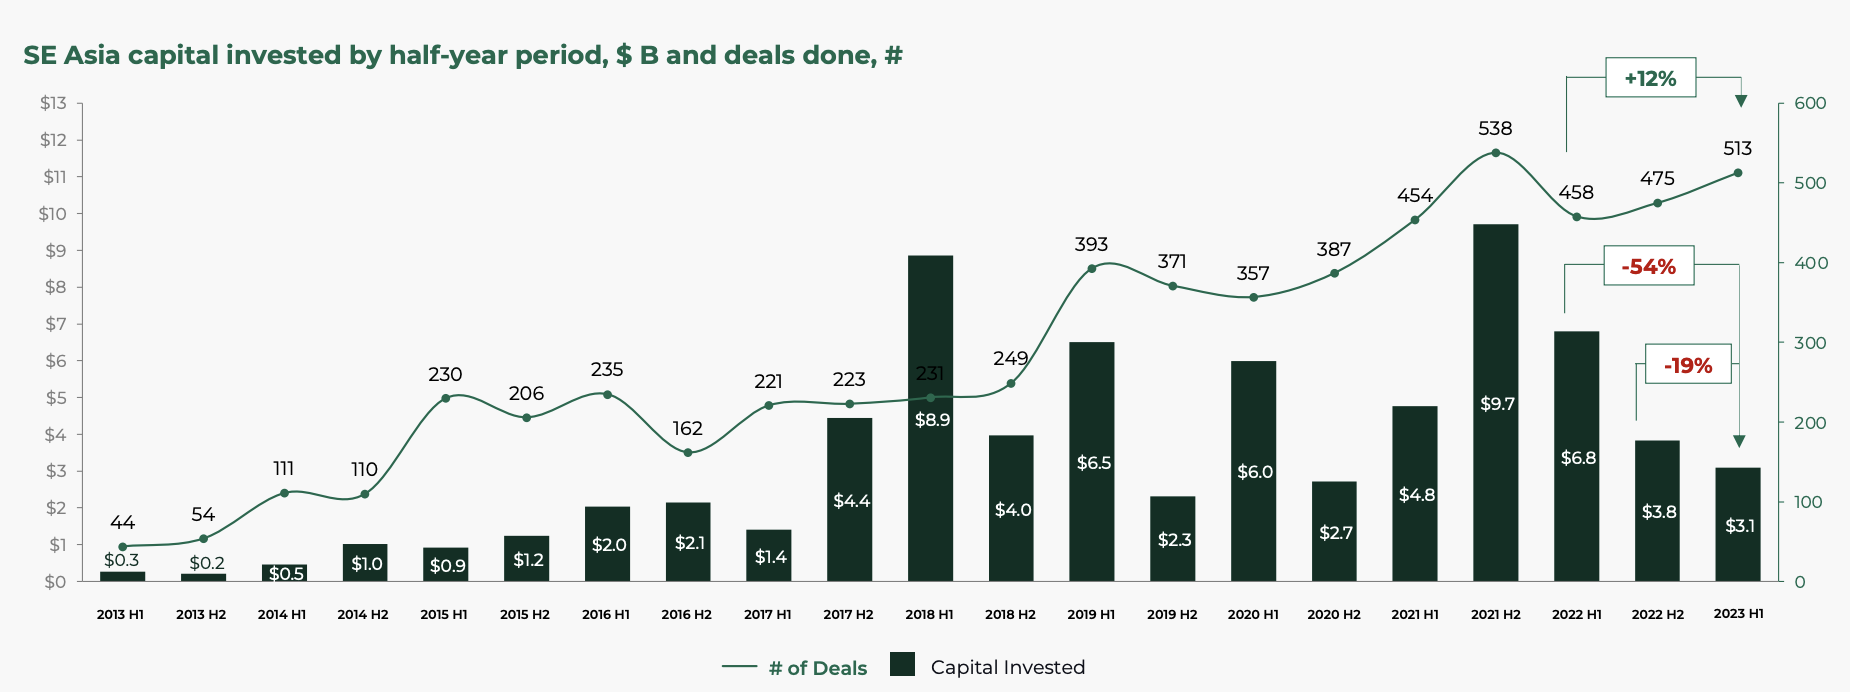 Southeast Asia capital invested by half-year period, US$B and deals done, #, Source: Southeast Asia Tech Investment 2023 H1, Cento Ventures, Dec 2023